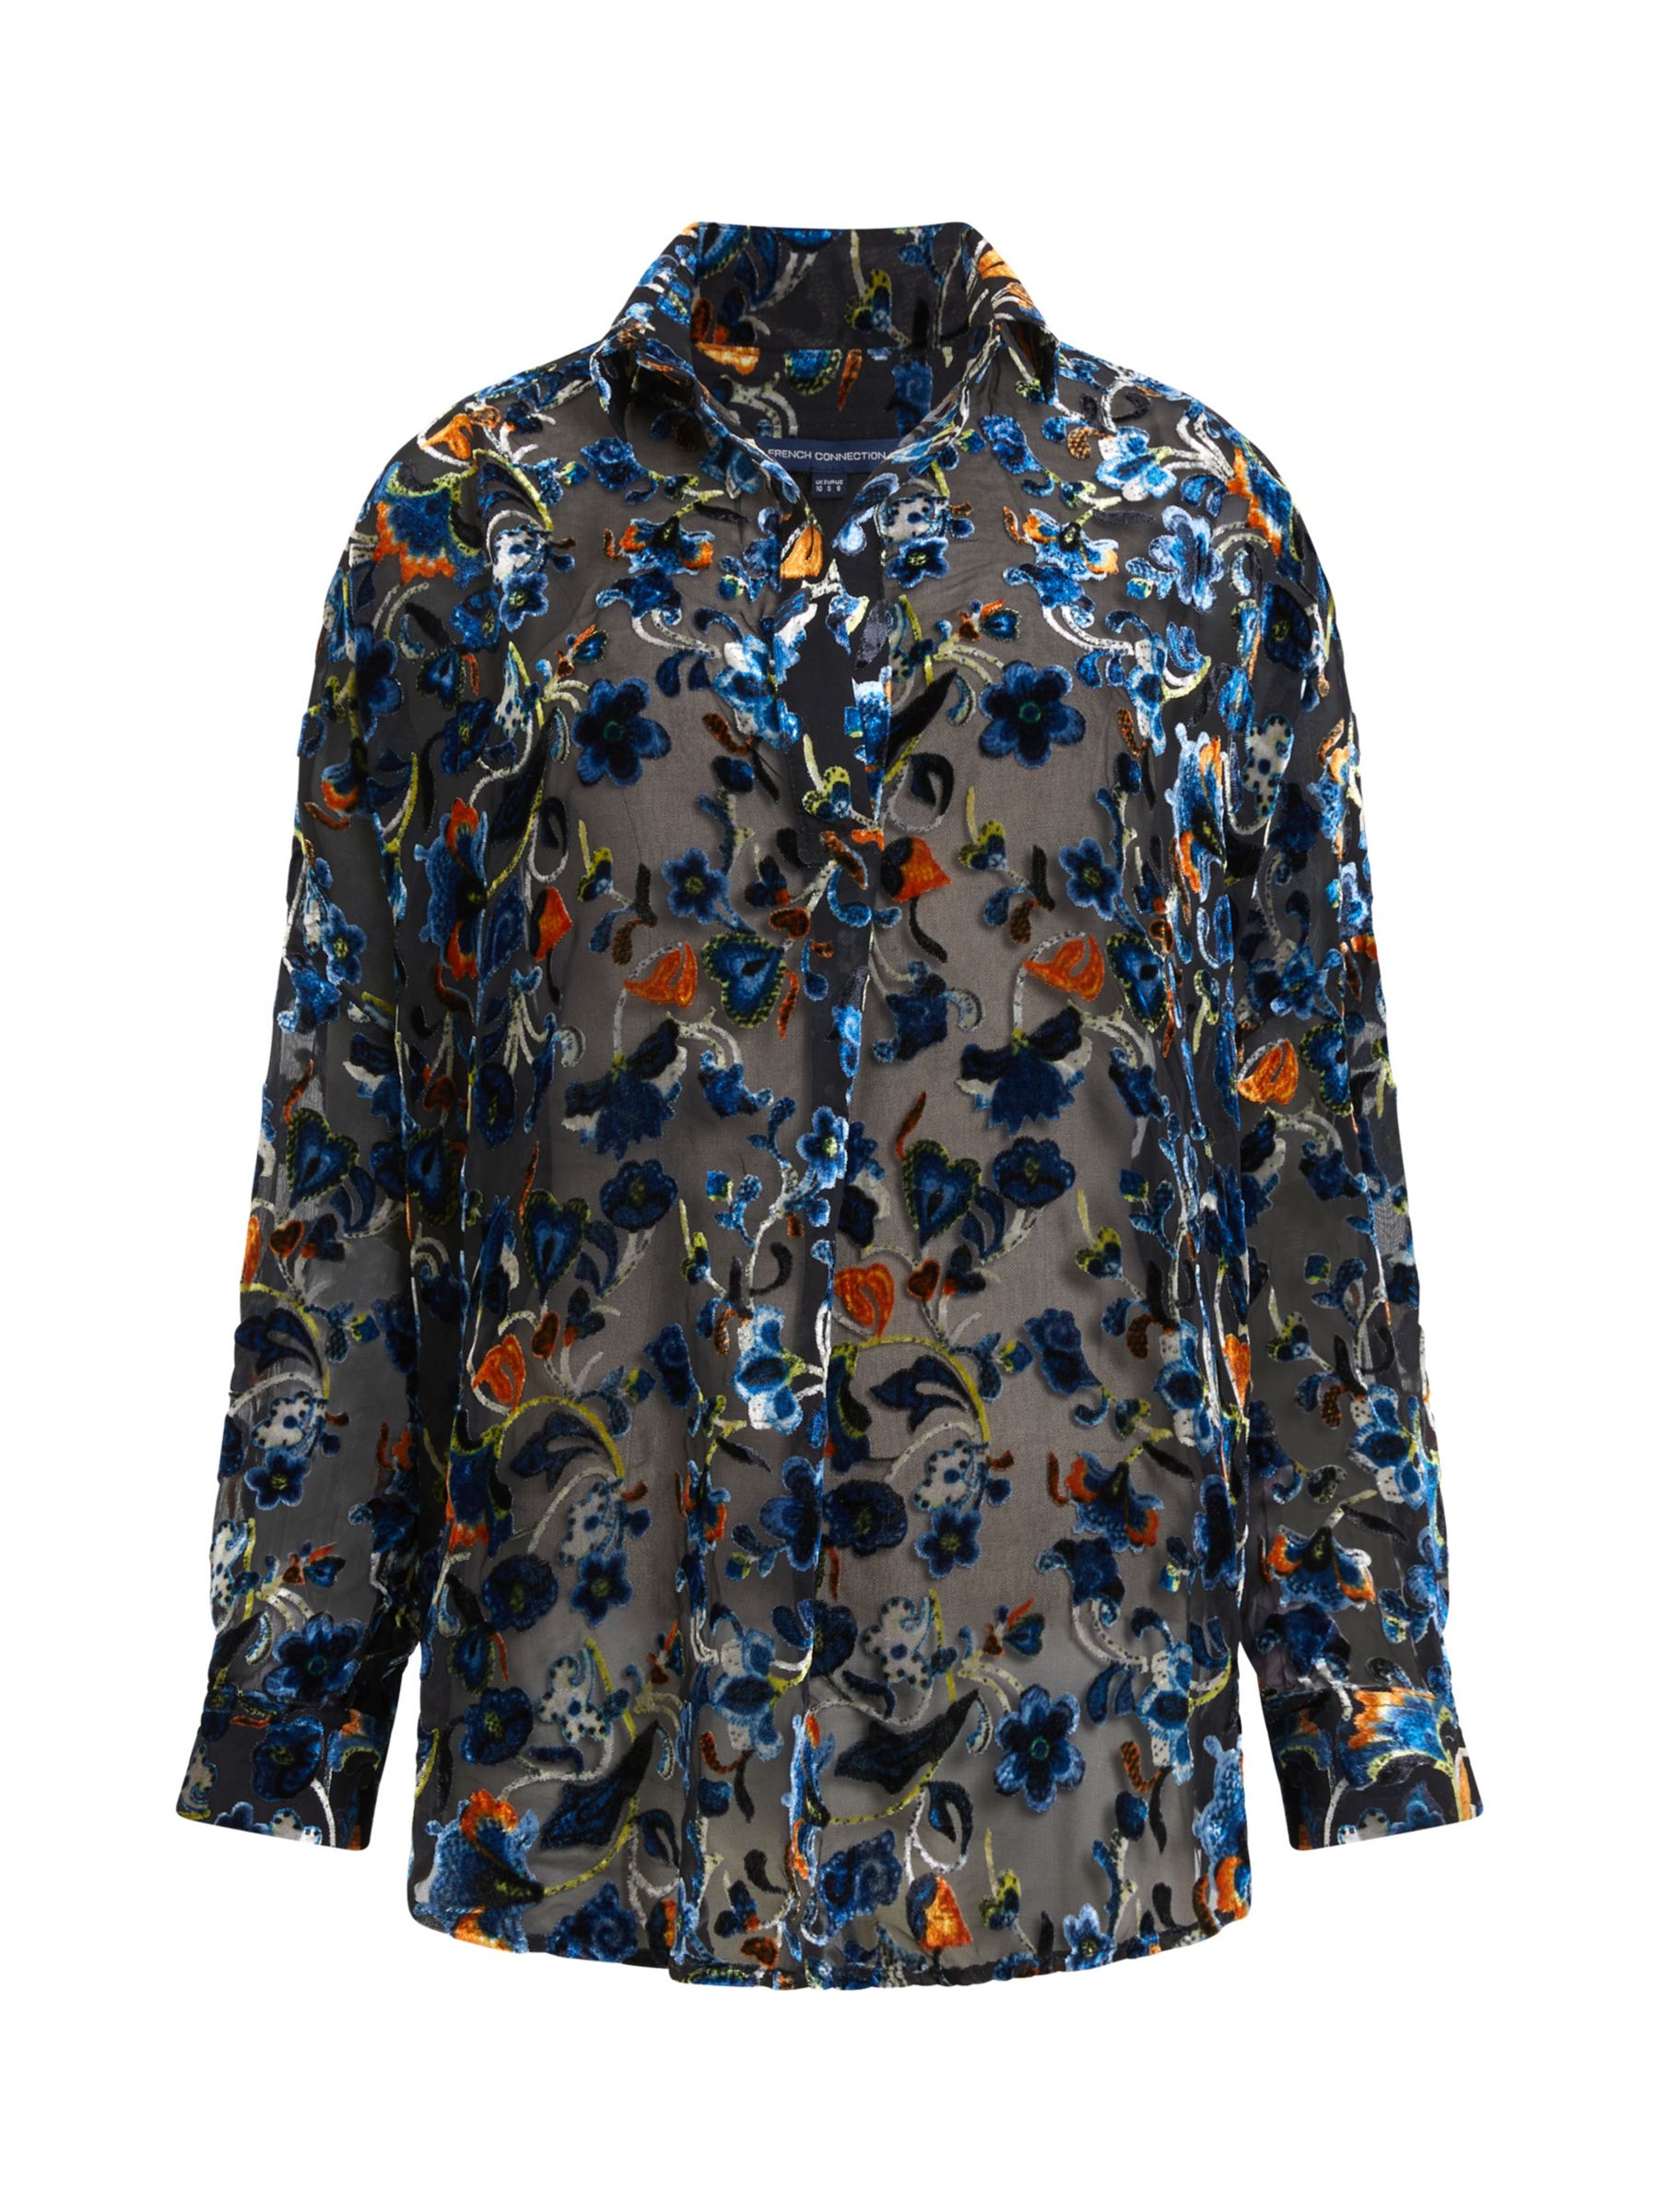 Buy French Connection Avery Burnout Popover, Black/Multi Online at johnlewis.com